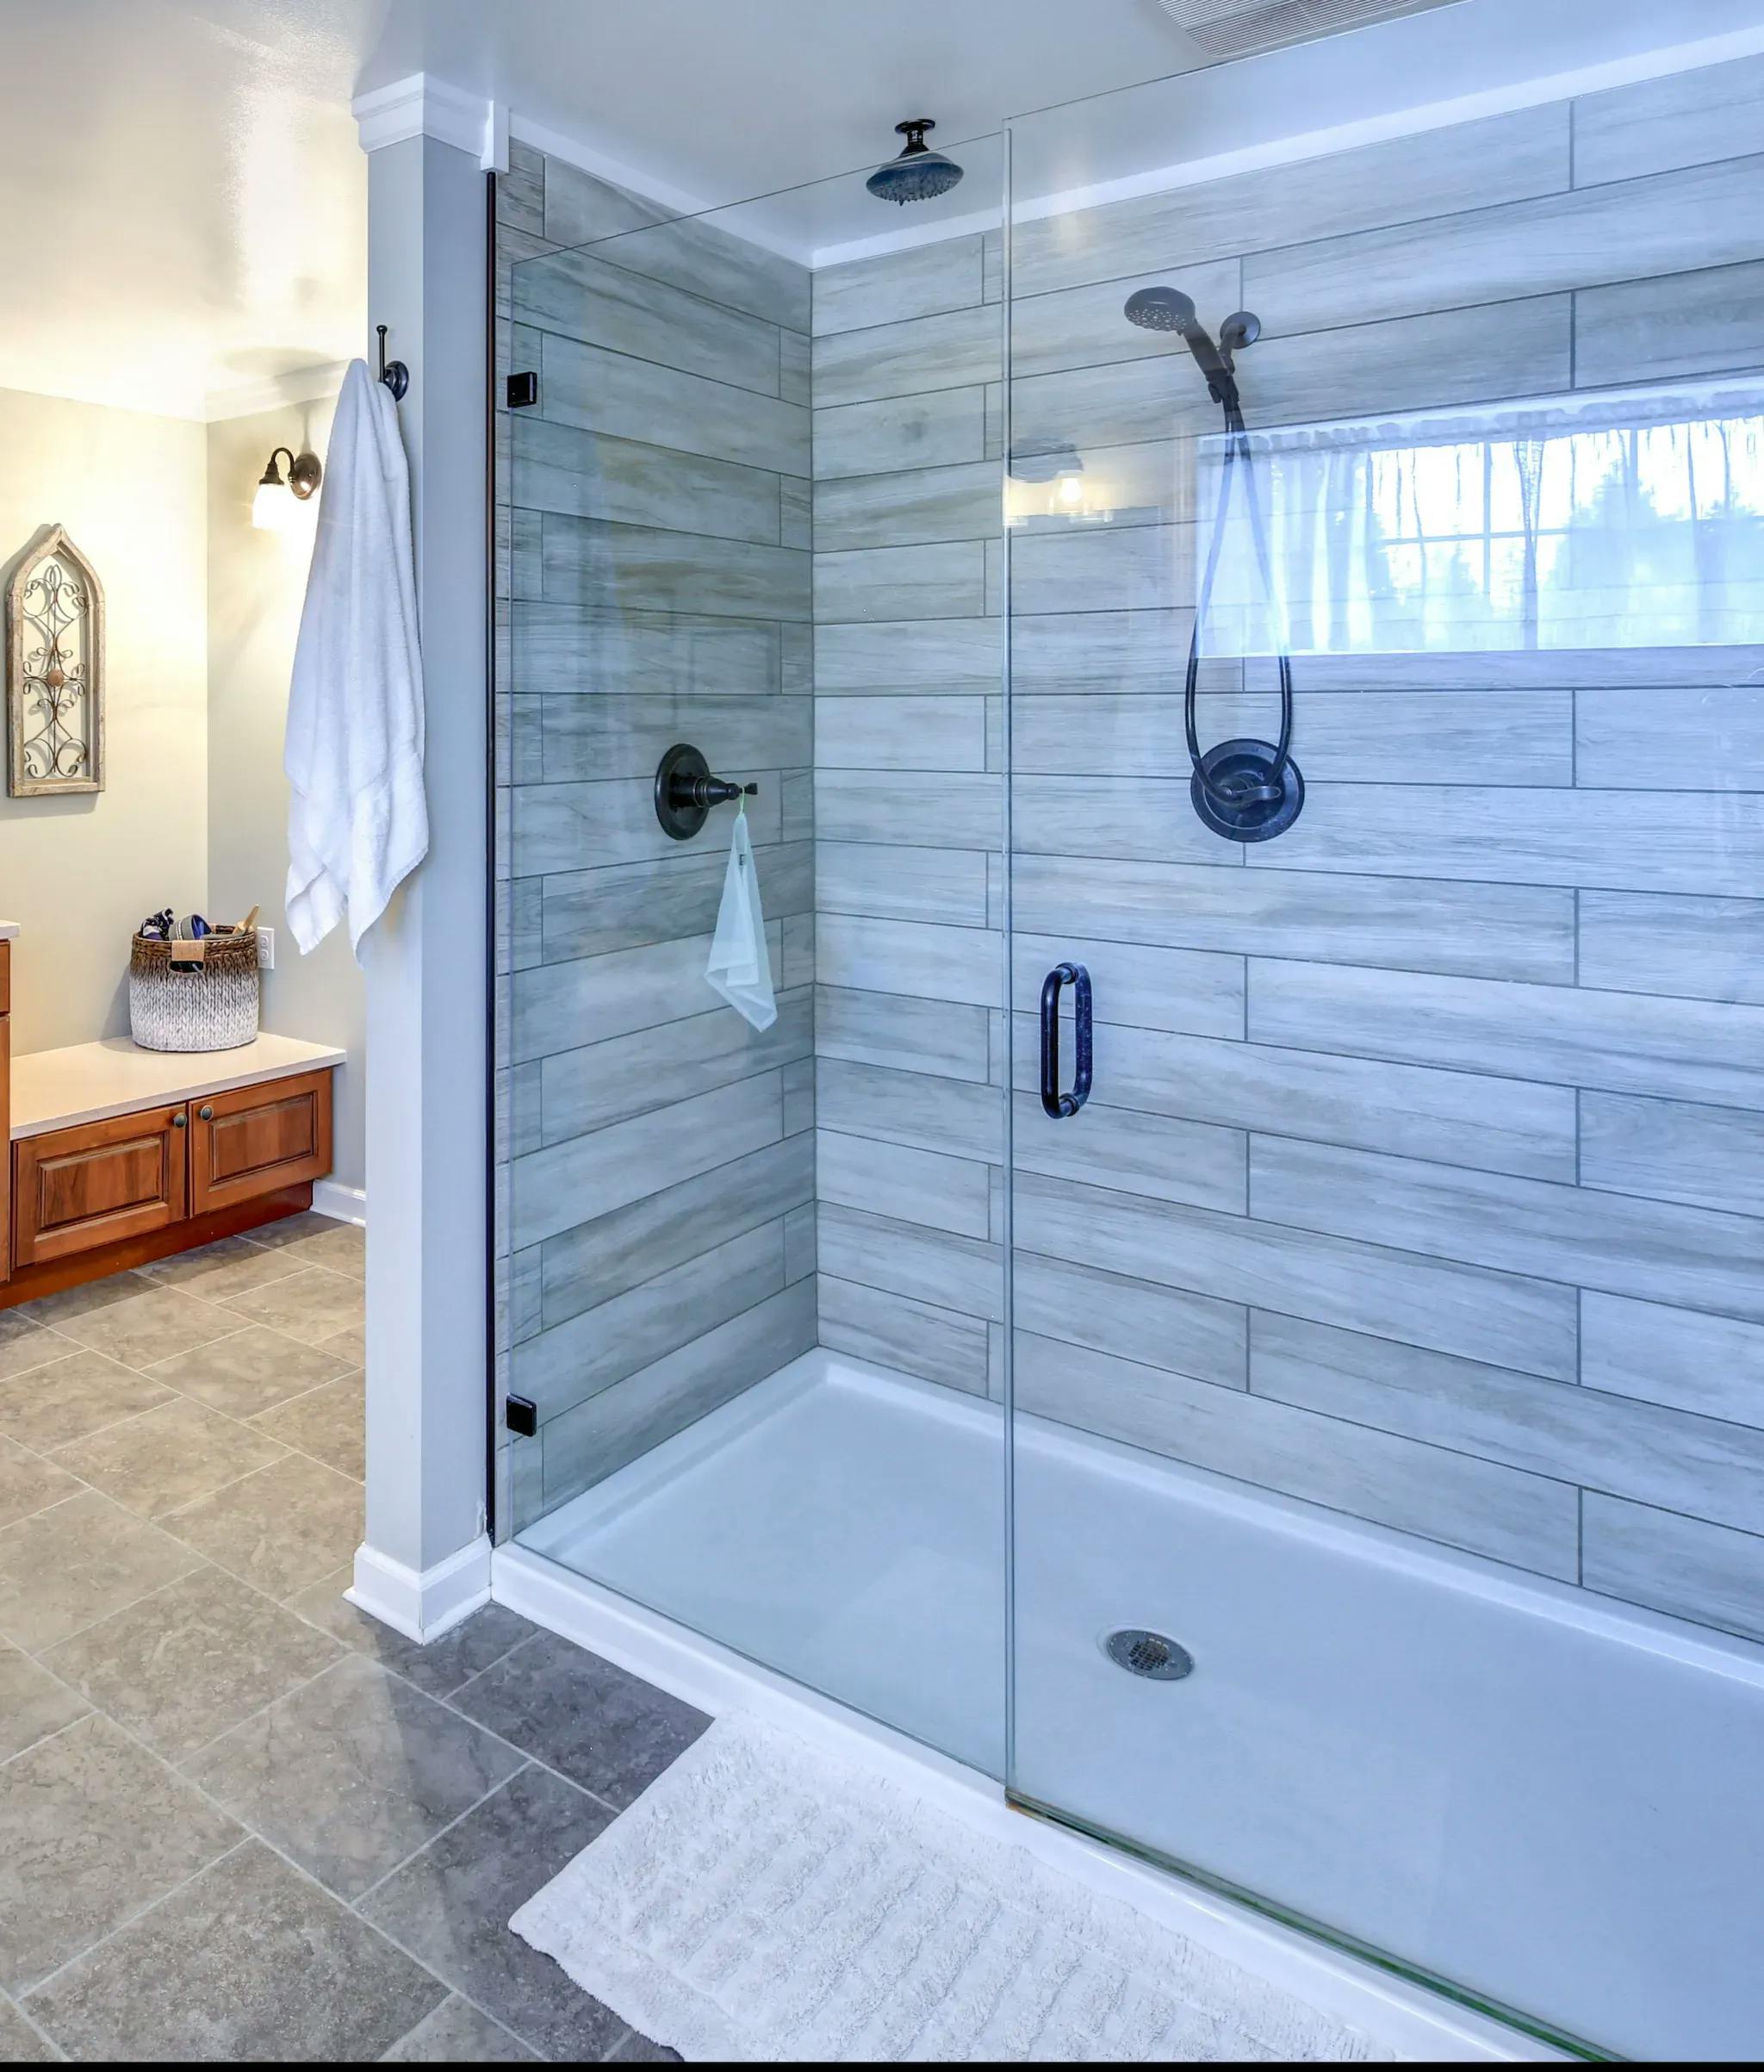 Bathroom setting featuring the Prima glass shower door model with clear glass and black shower door hardware.